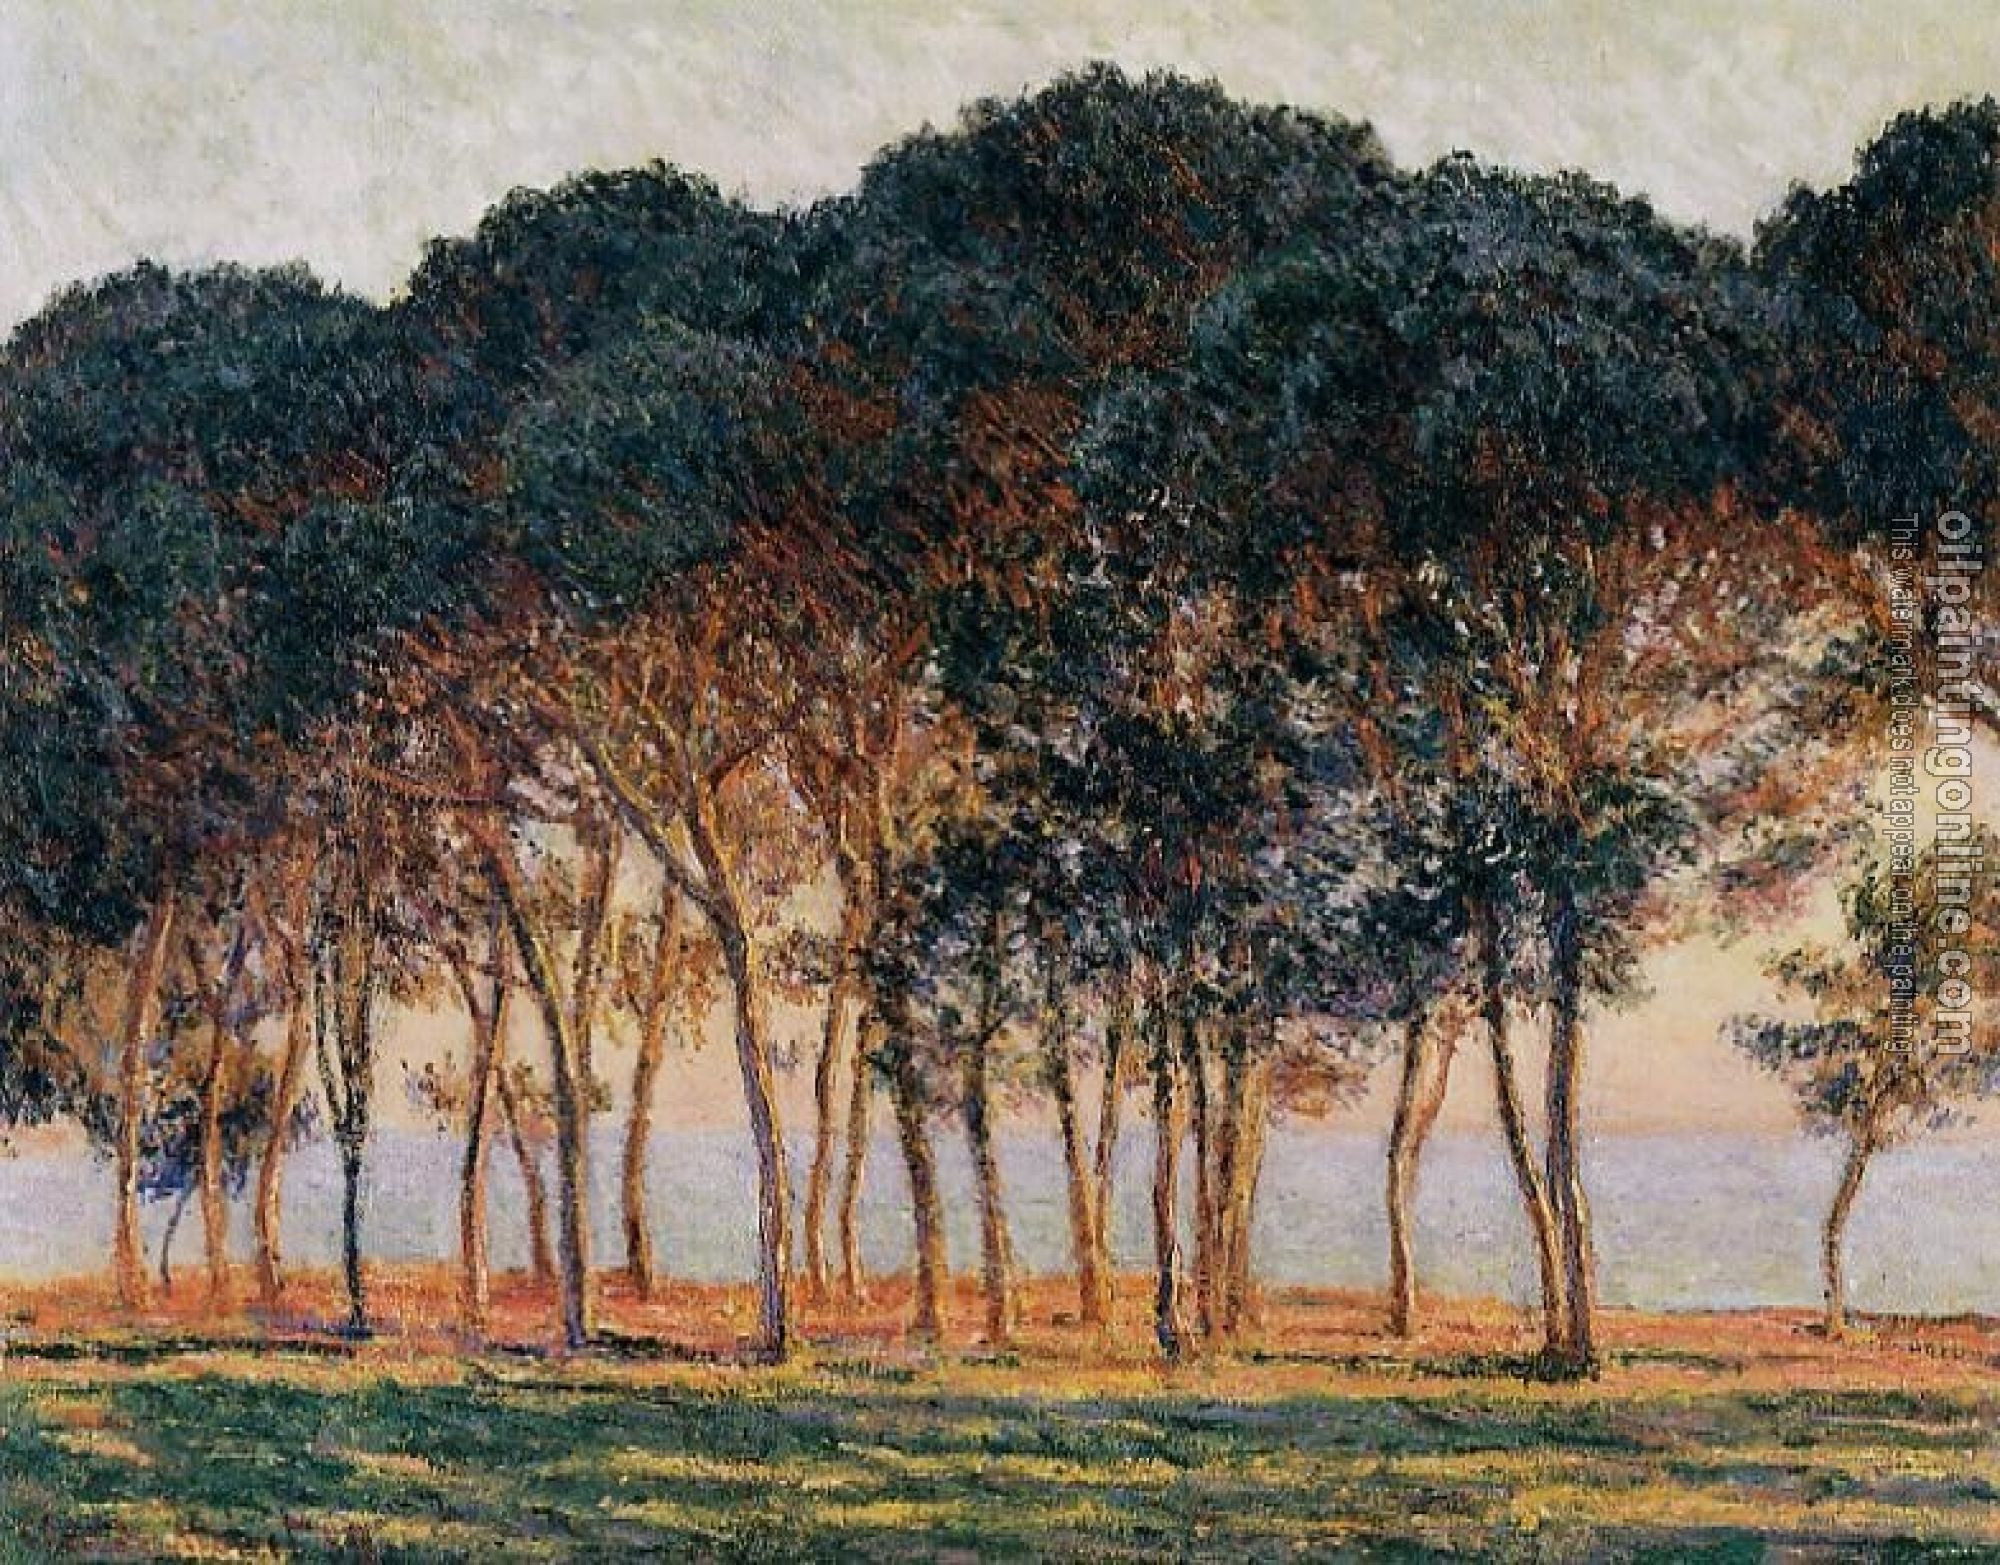 Monet, Claude Oscar - Under the Pine Trees at the End of the Day